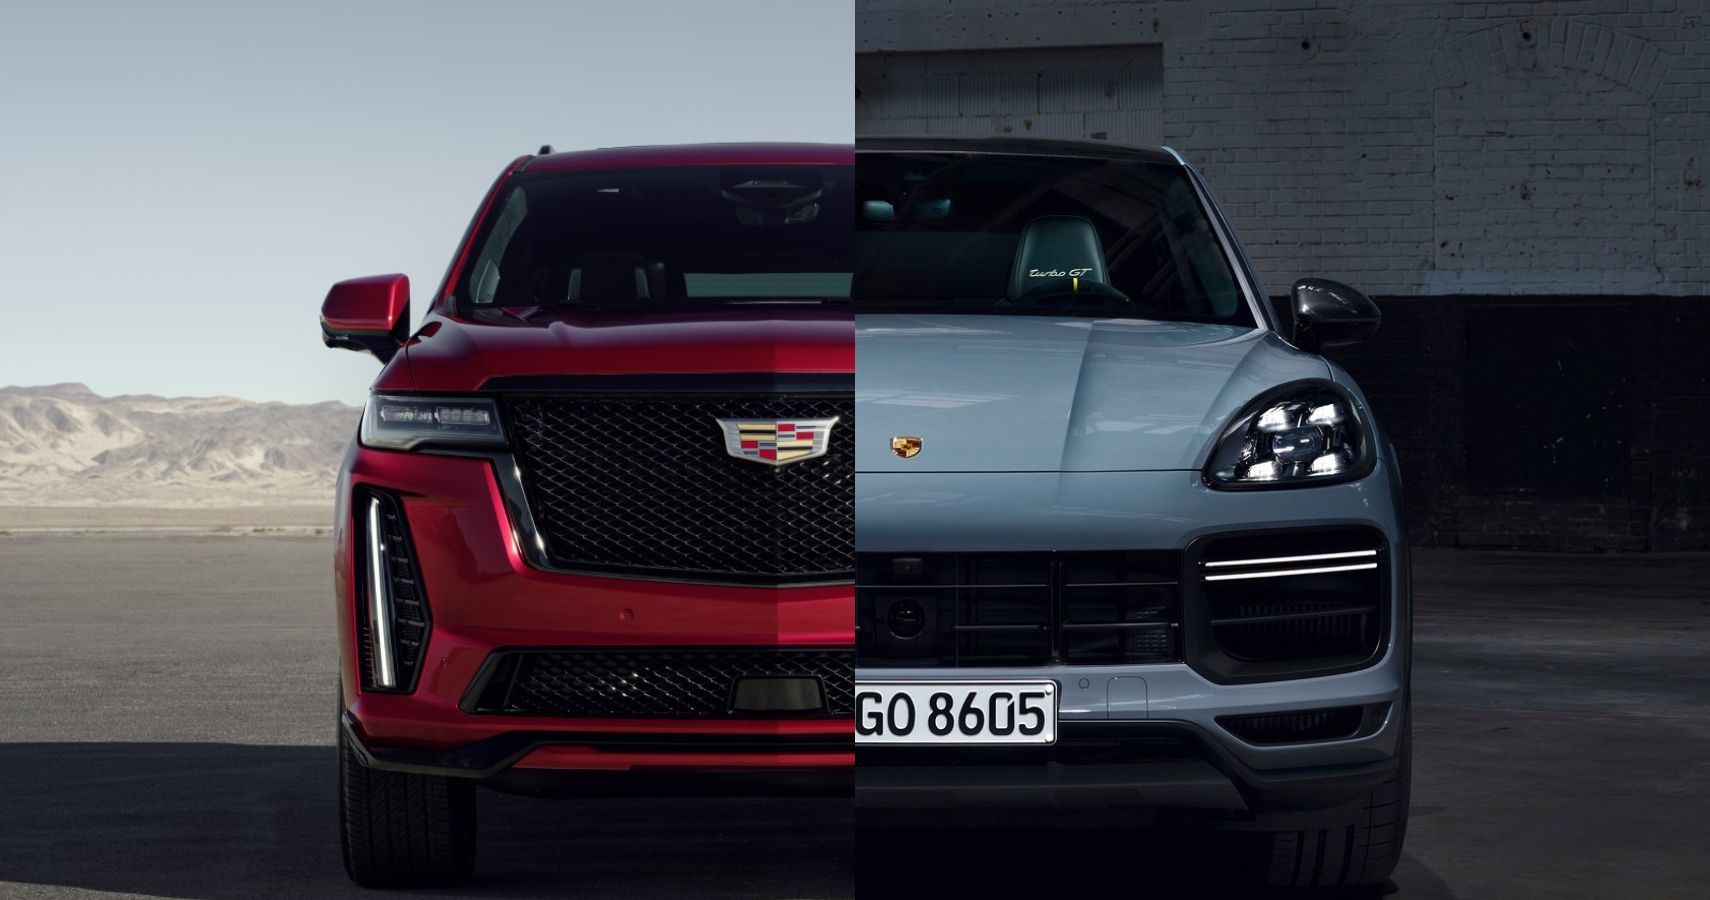 2022 Porsche Cayenne Turbo GT And 2023 Cadillac Escalade-V side-by-side comparison view